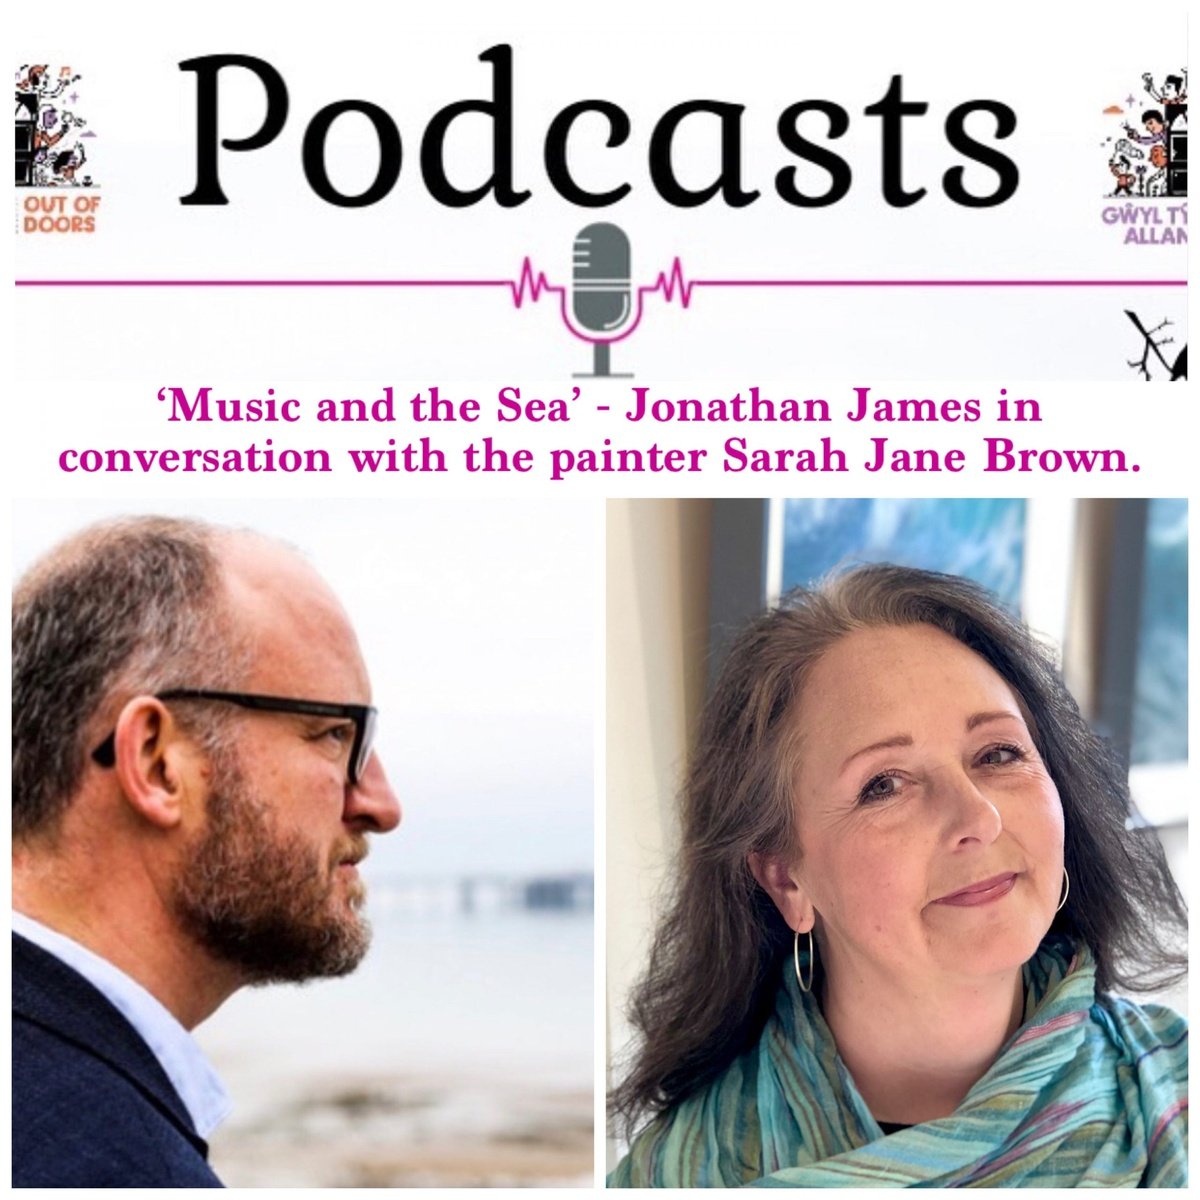 Podcast interview 'Music and the Sea'